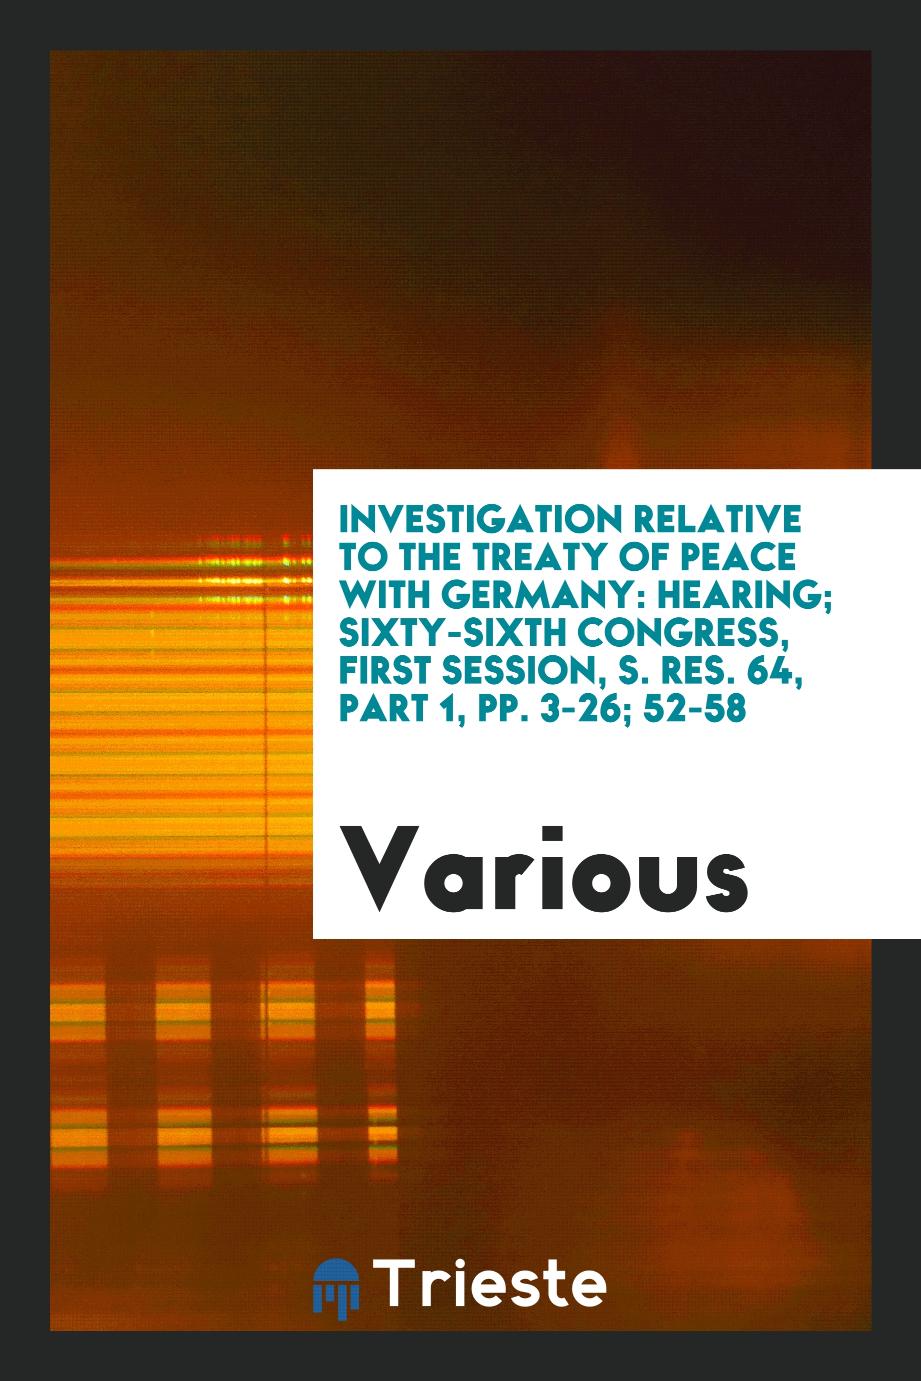 Investigation Relative to the Treaty of Peace with Germany: Hearing; sixty-sixth congress, first session, S. Res. 64, Part 1, pp. 3-26; 52-58